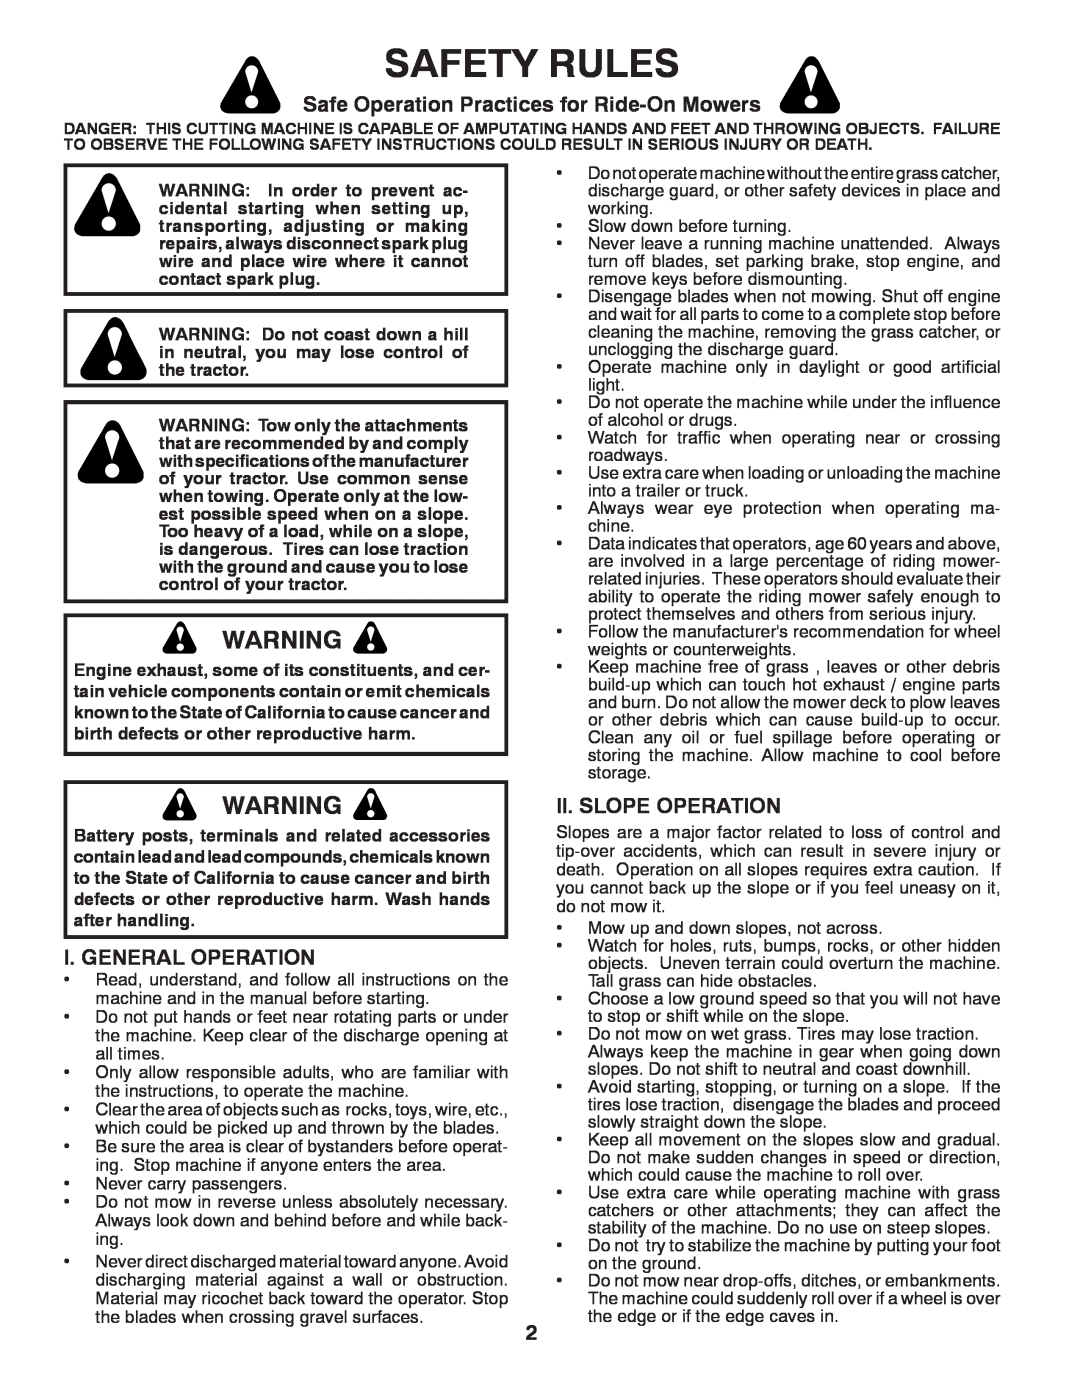 Husqvarna 96045001501 Safety Rules, Safe Operation Practices for Ride-On Mowers, I. General Operation, Ii. Slope Operation 